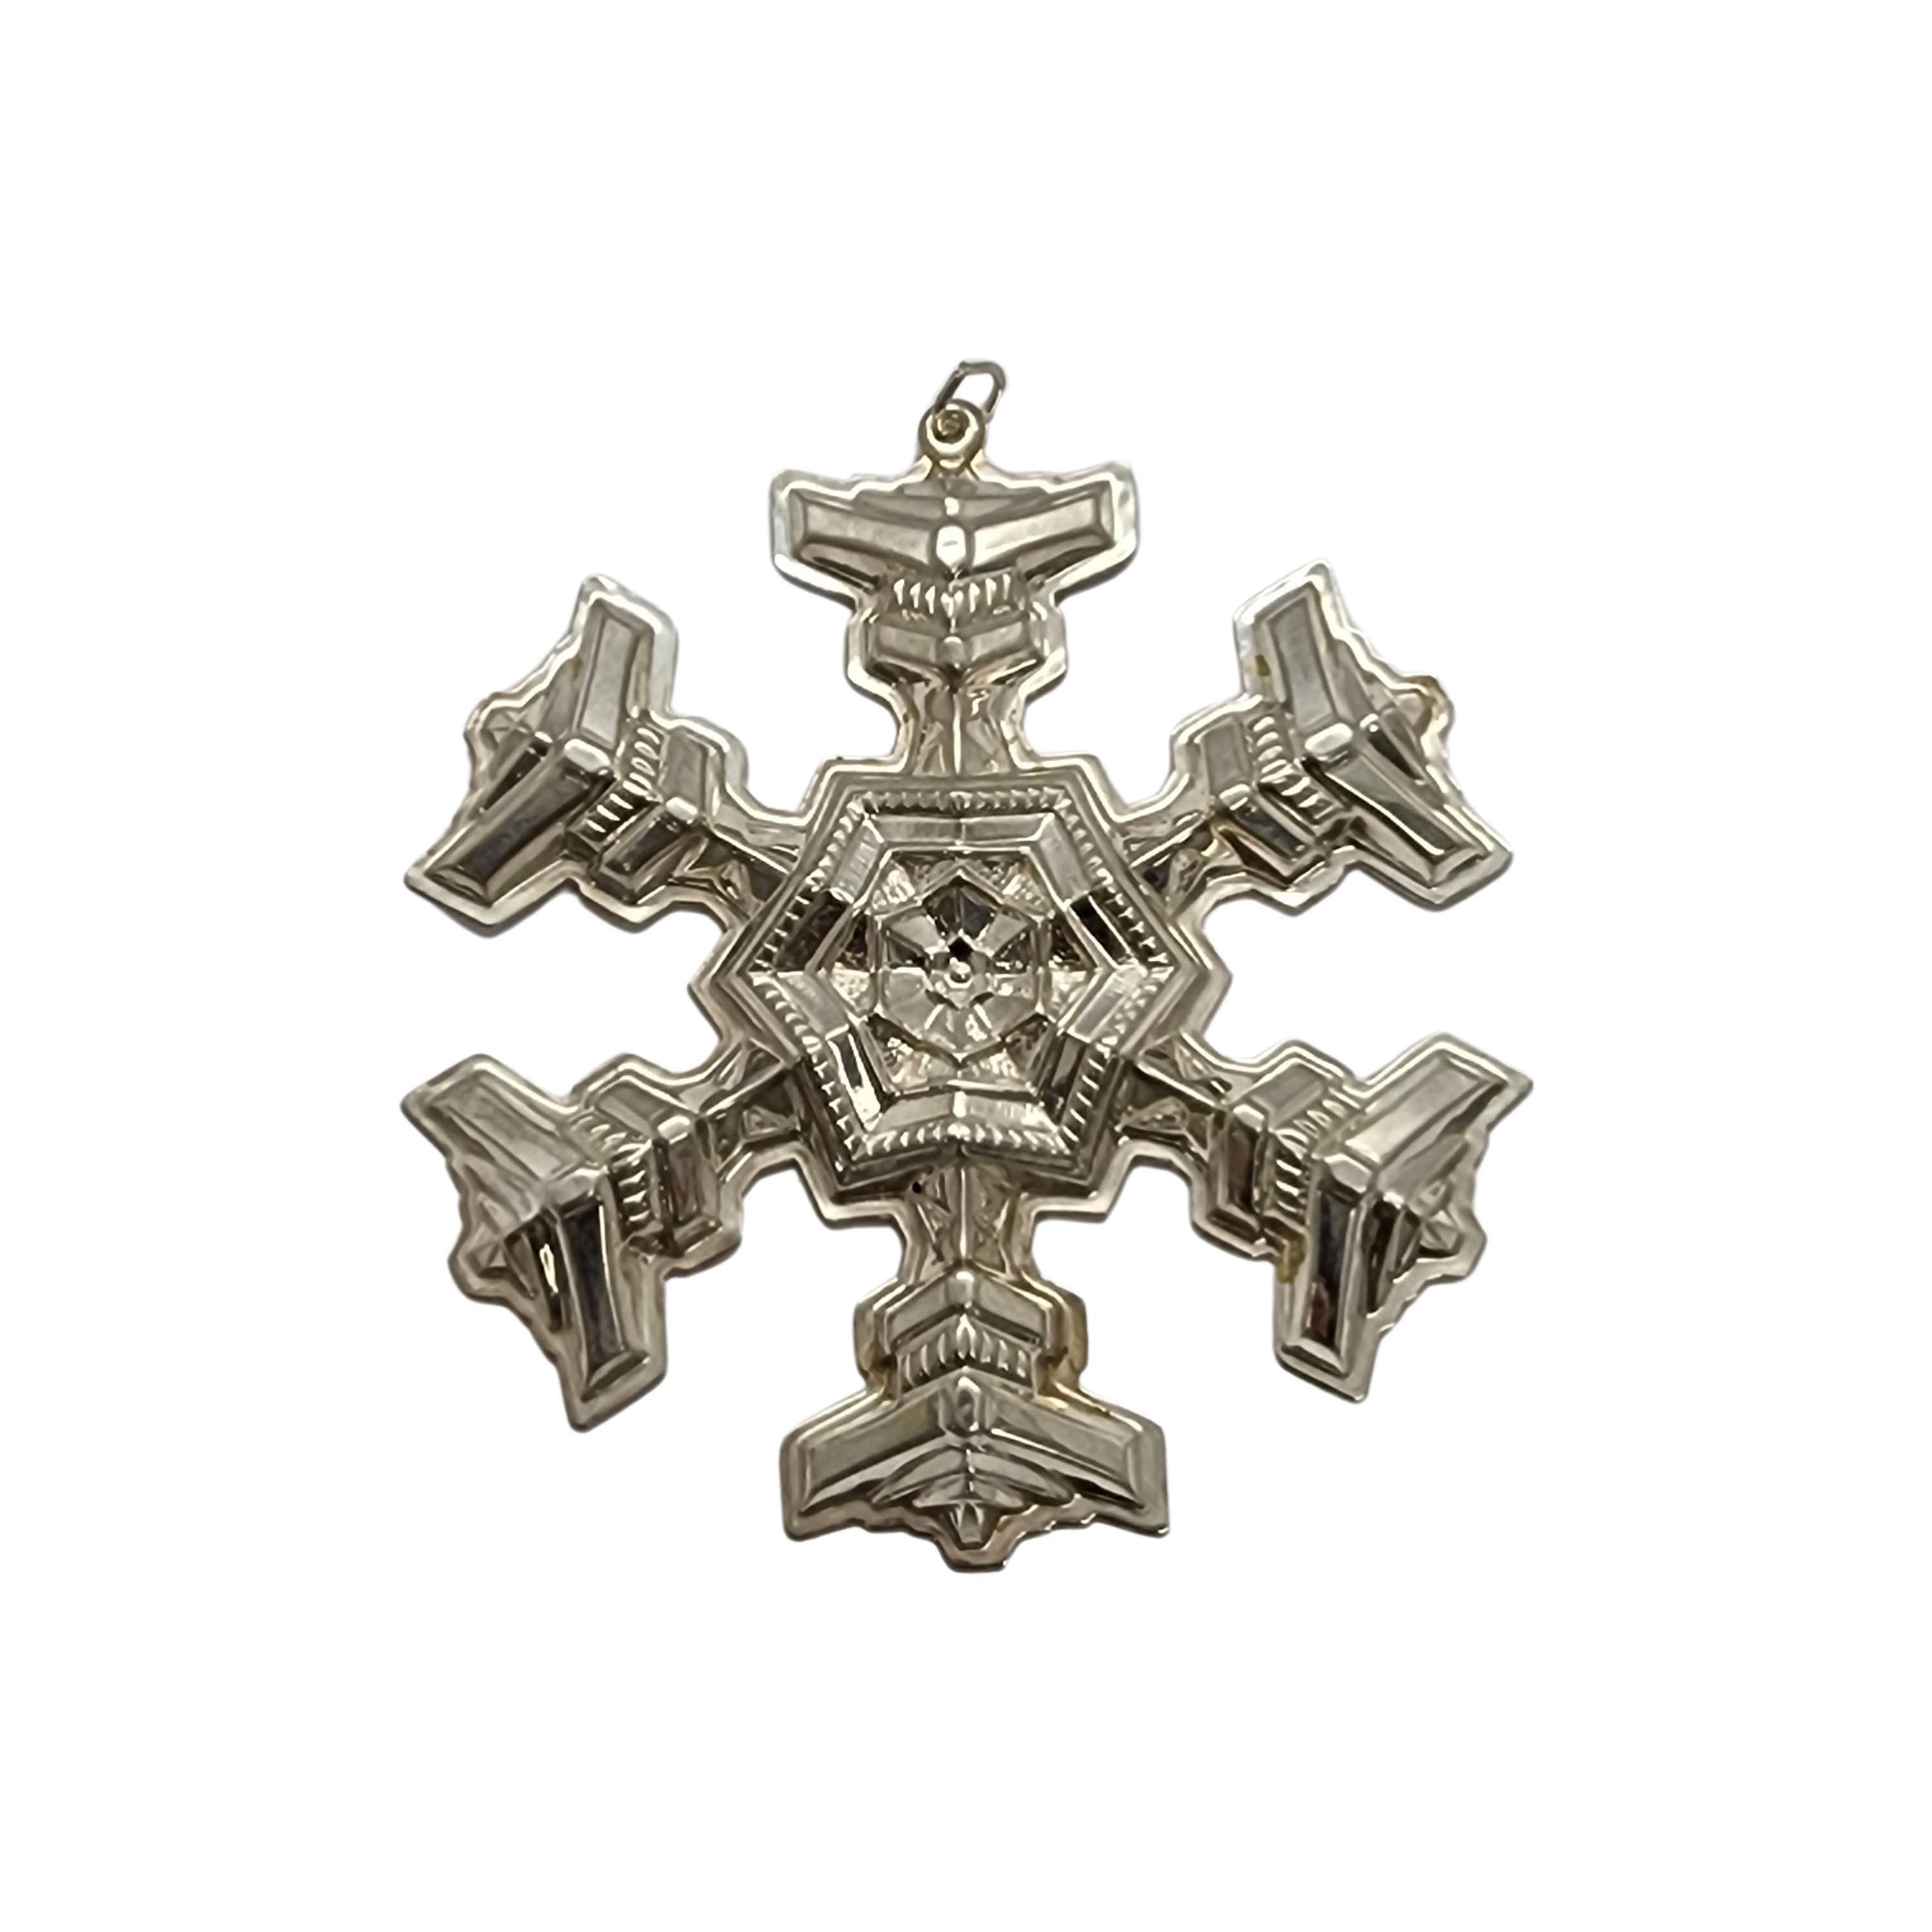 Gorham sterling silver snowflake ornament from 1977 with box and pouch.

Since 1970, Gorham has been celebrating the season with a yearly version of the classic snowflake form, creating a beautiful tradition of sparkling art. Includes original